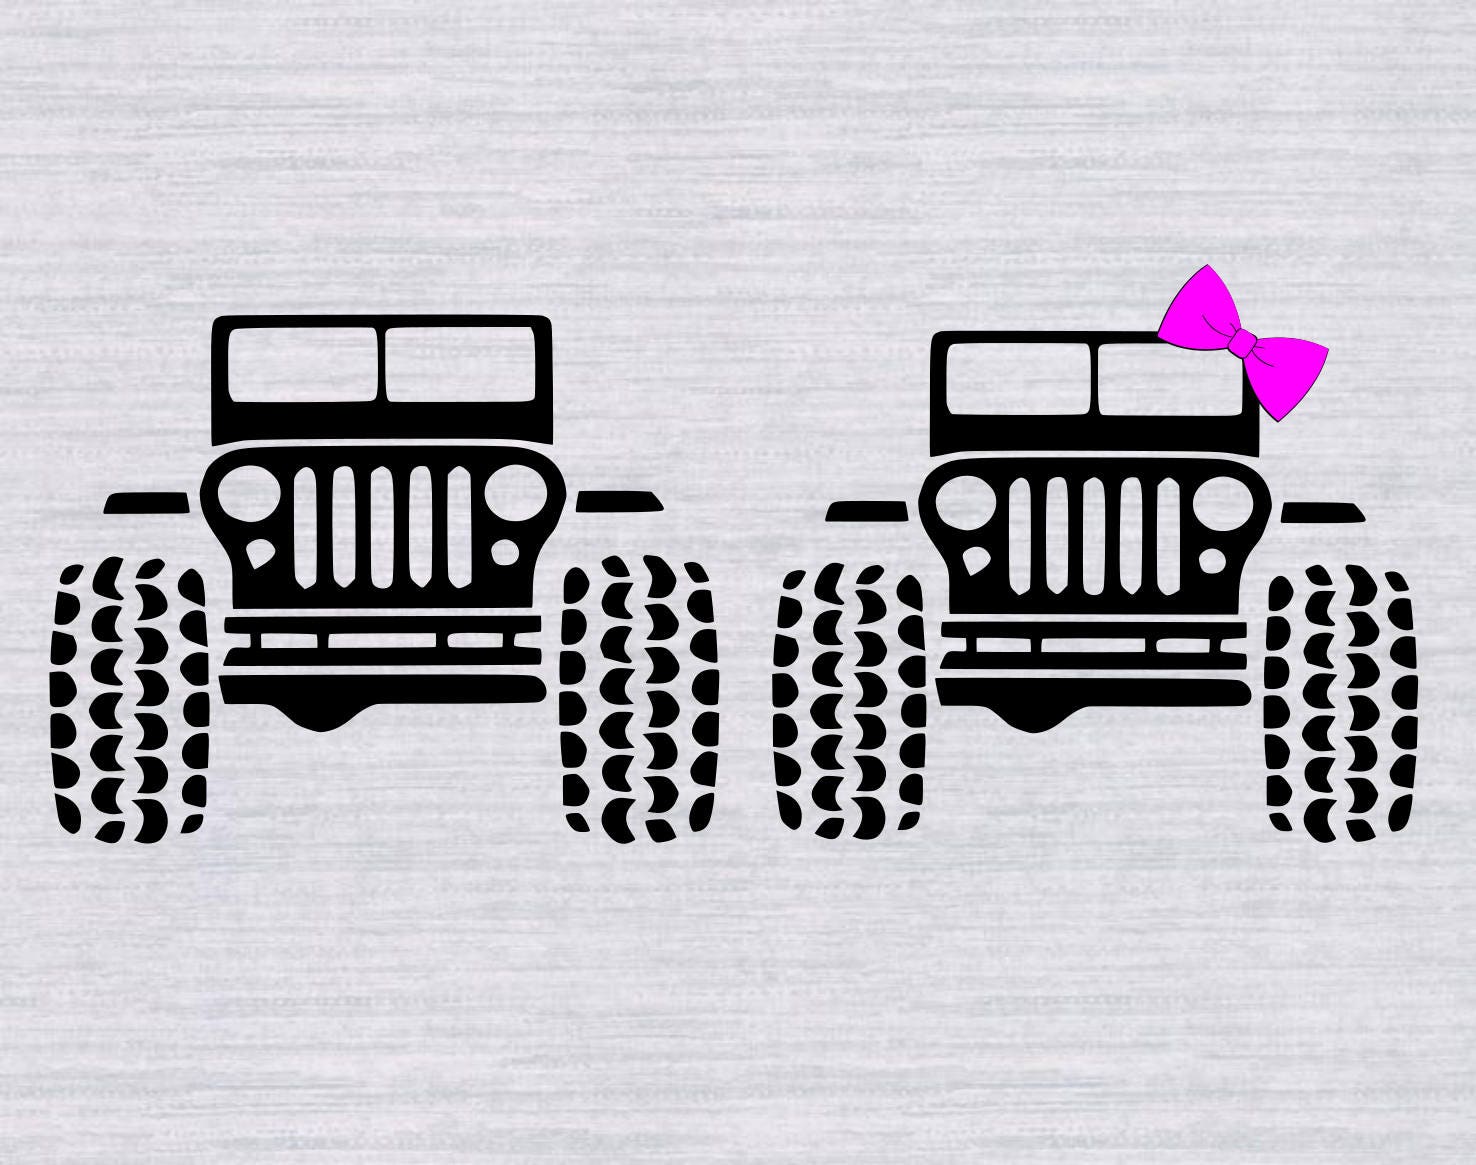 Download Jeep SVG Bundle - Jeep DXF - Jeep Clipart - Svg Files for ...